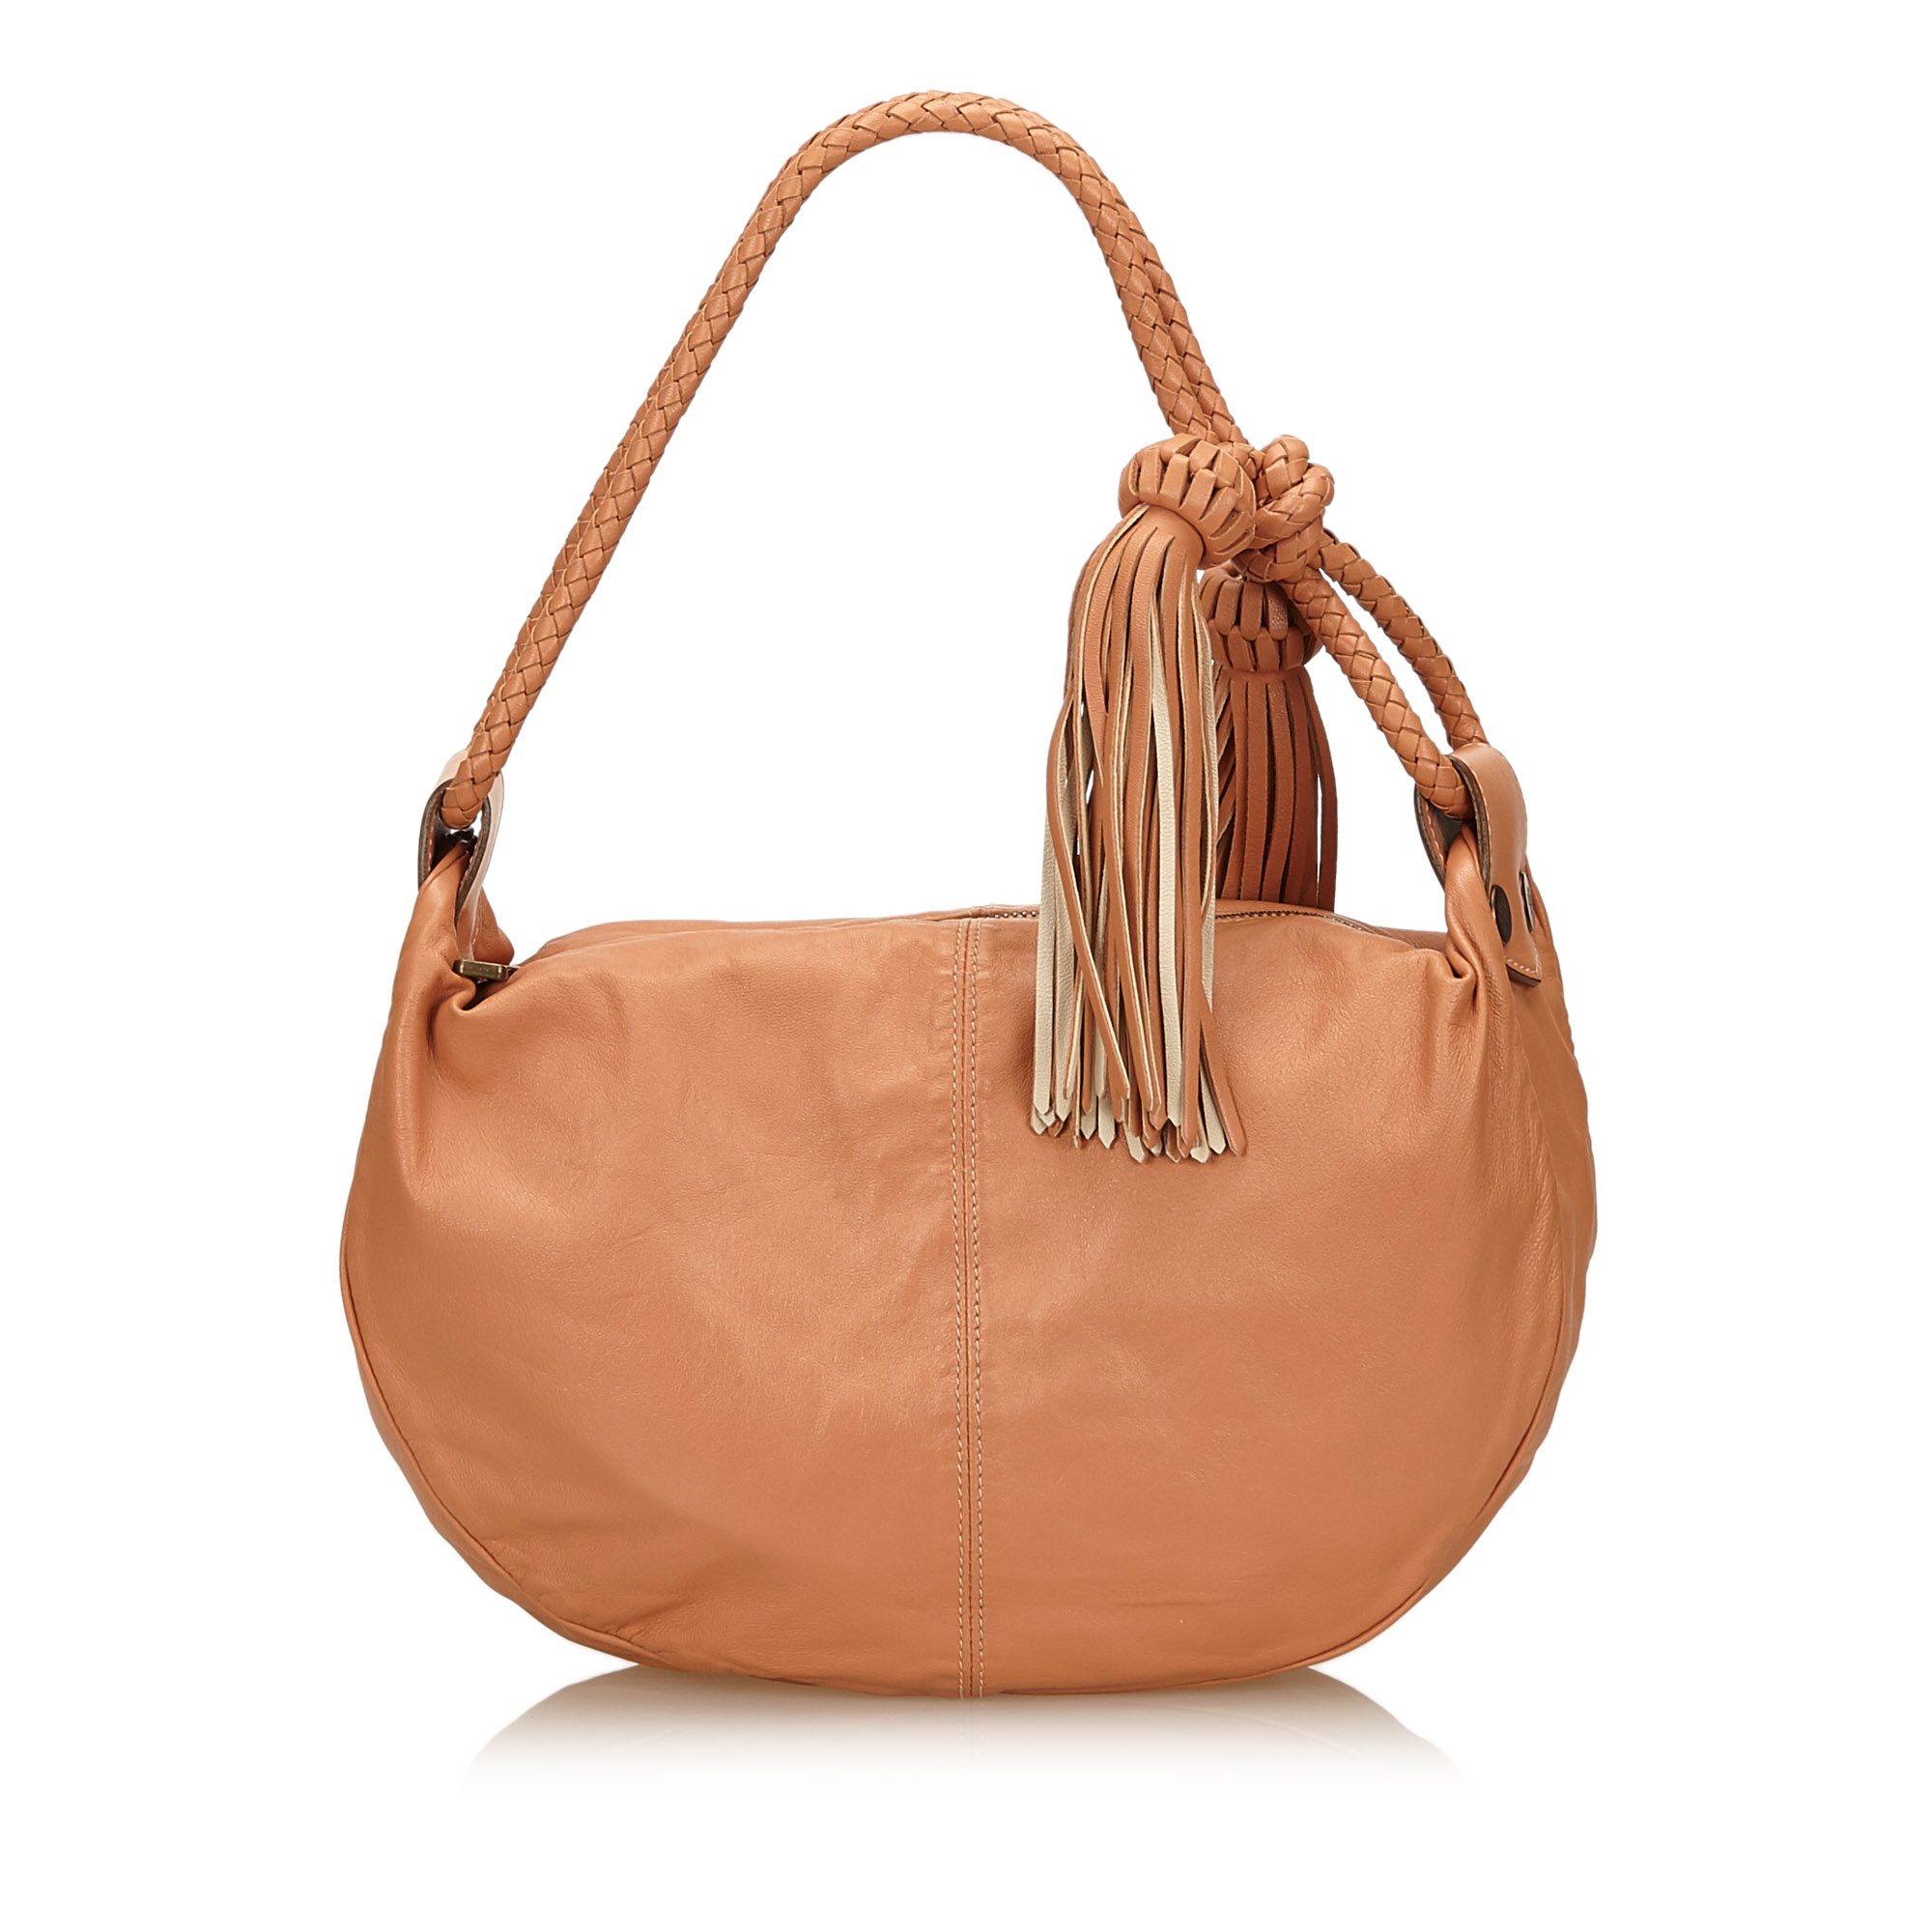 Mulberry Leather Tassel Shoulder Bag, this shoulder bag features a leather body, braided straps, a